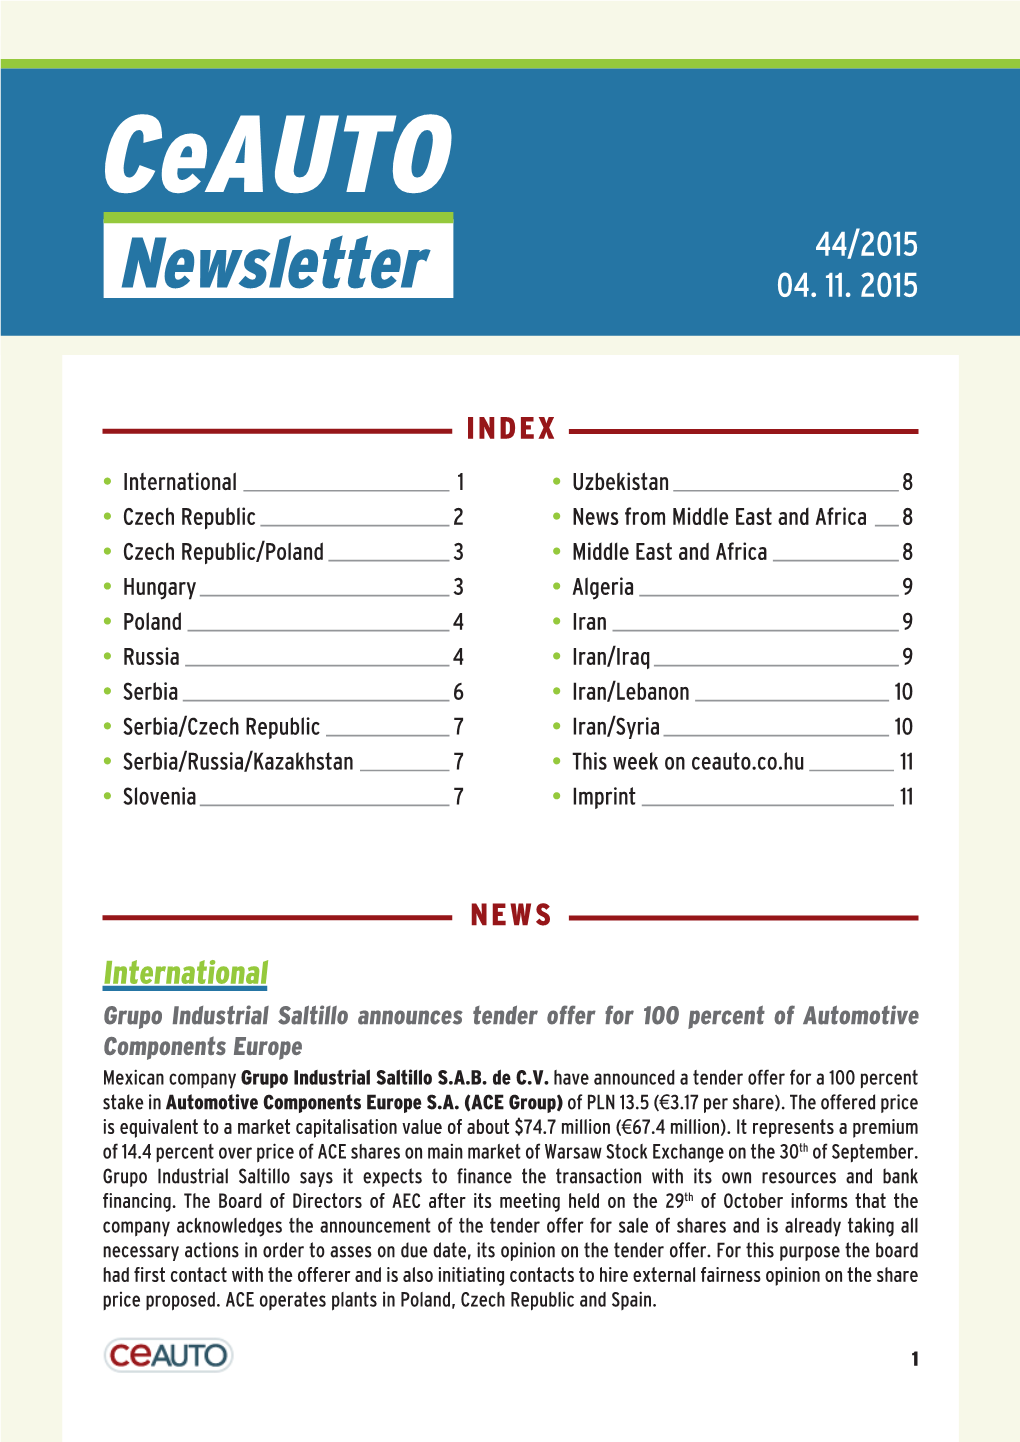 Ceauto 44/2015 Newsletter 04